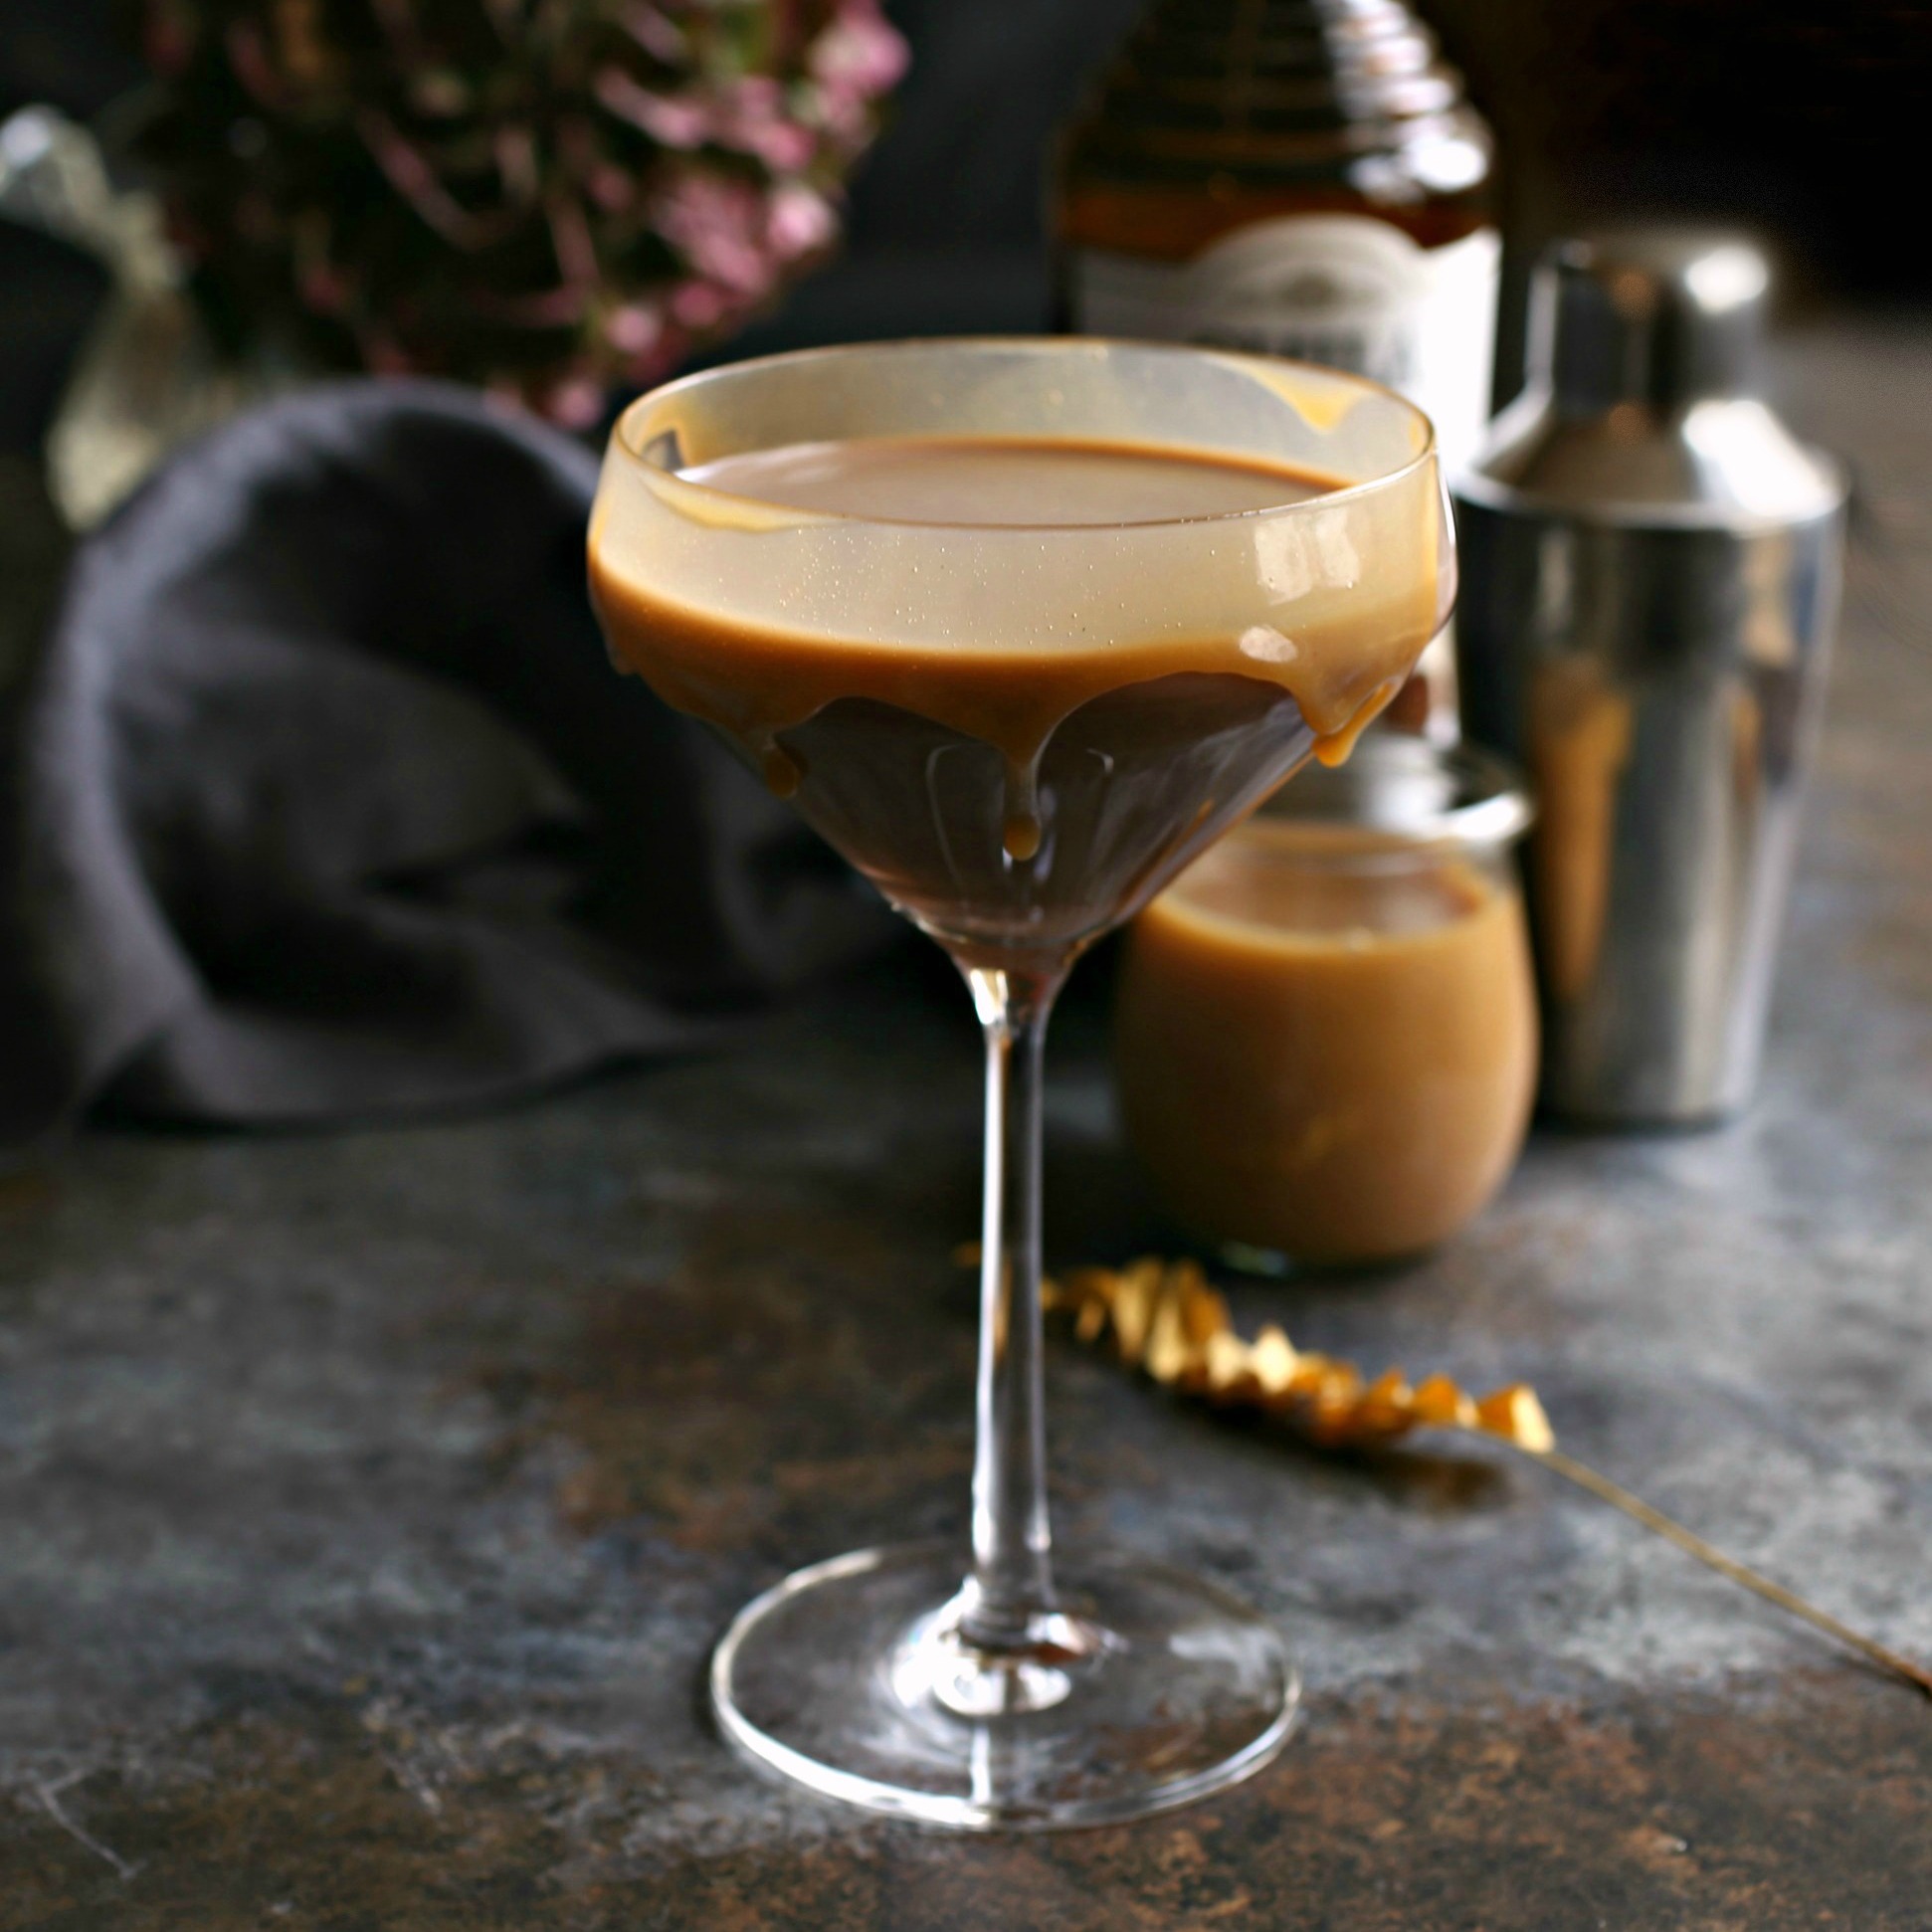 Recipe for a rum cocktail flavored with cocoa, caramel and cinnamon.